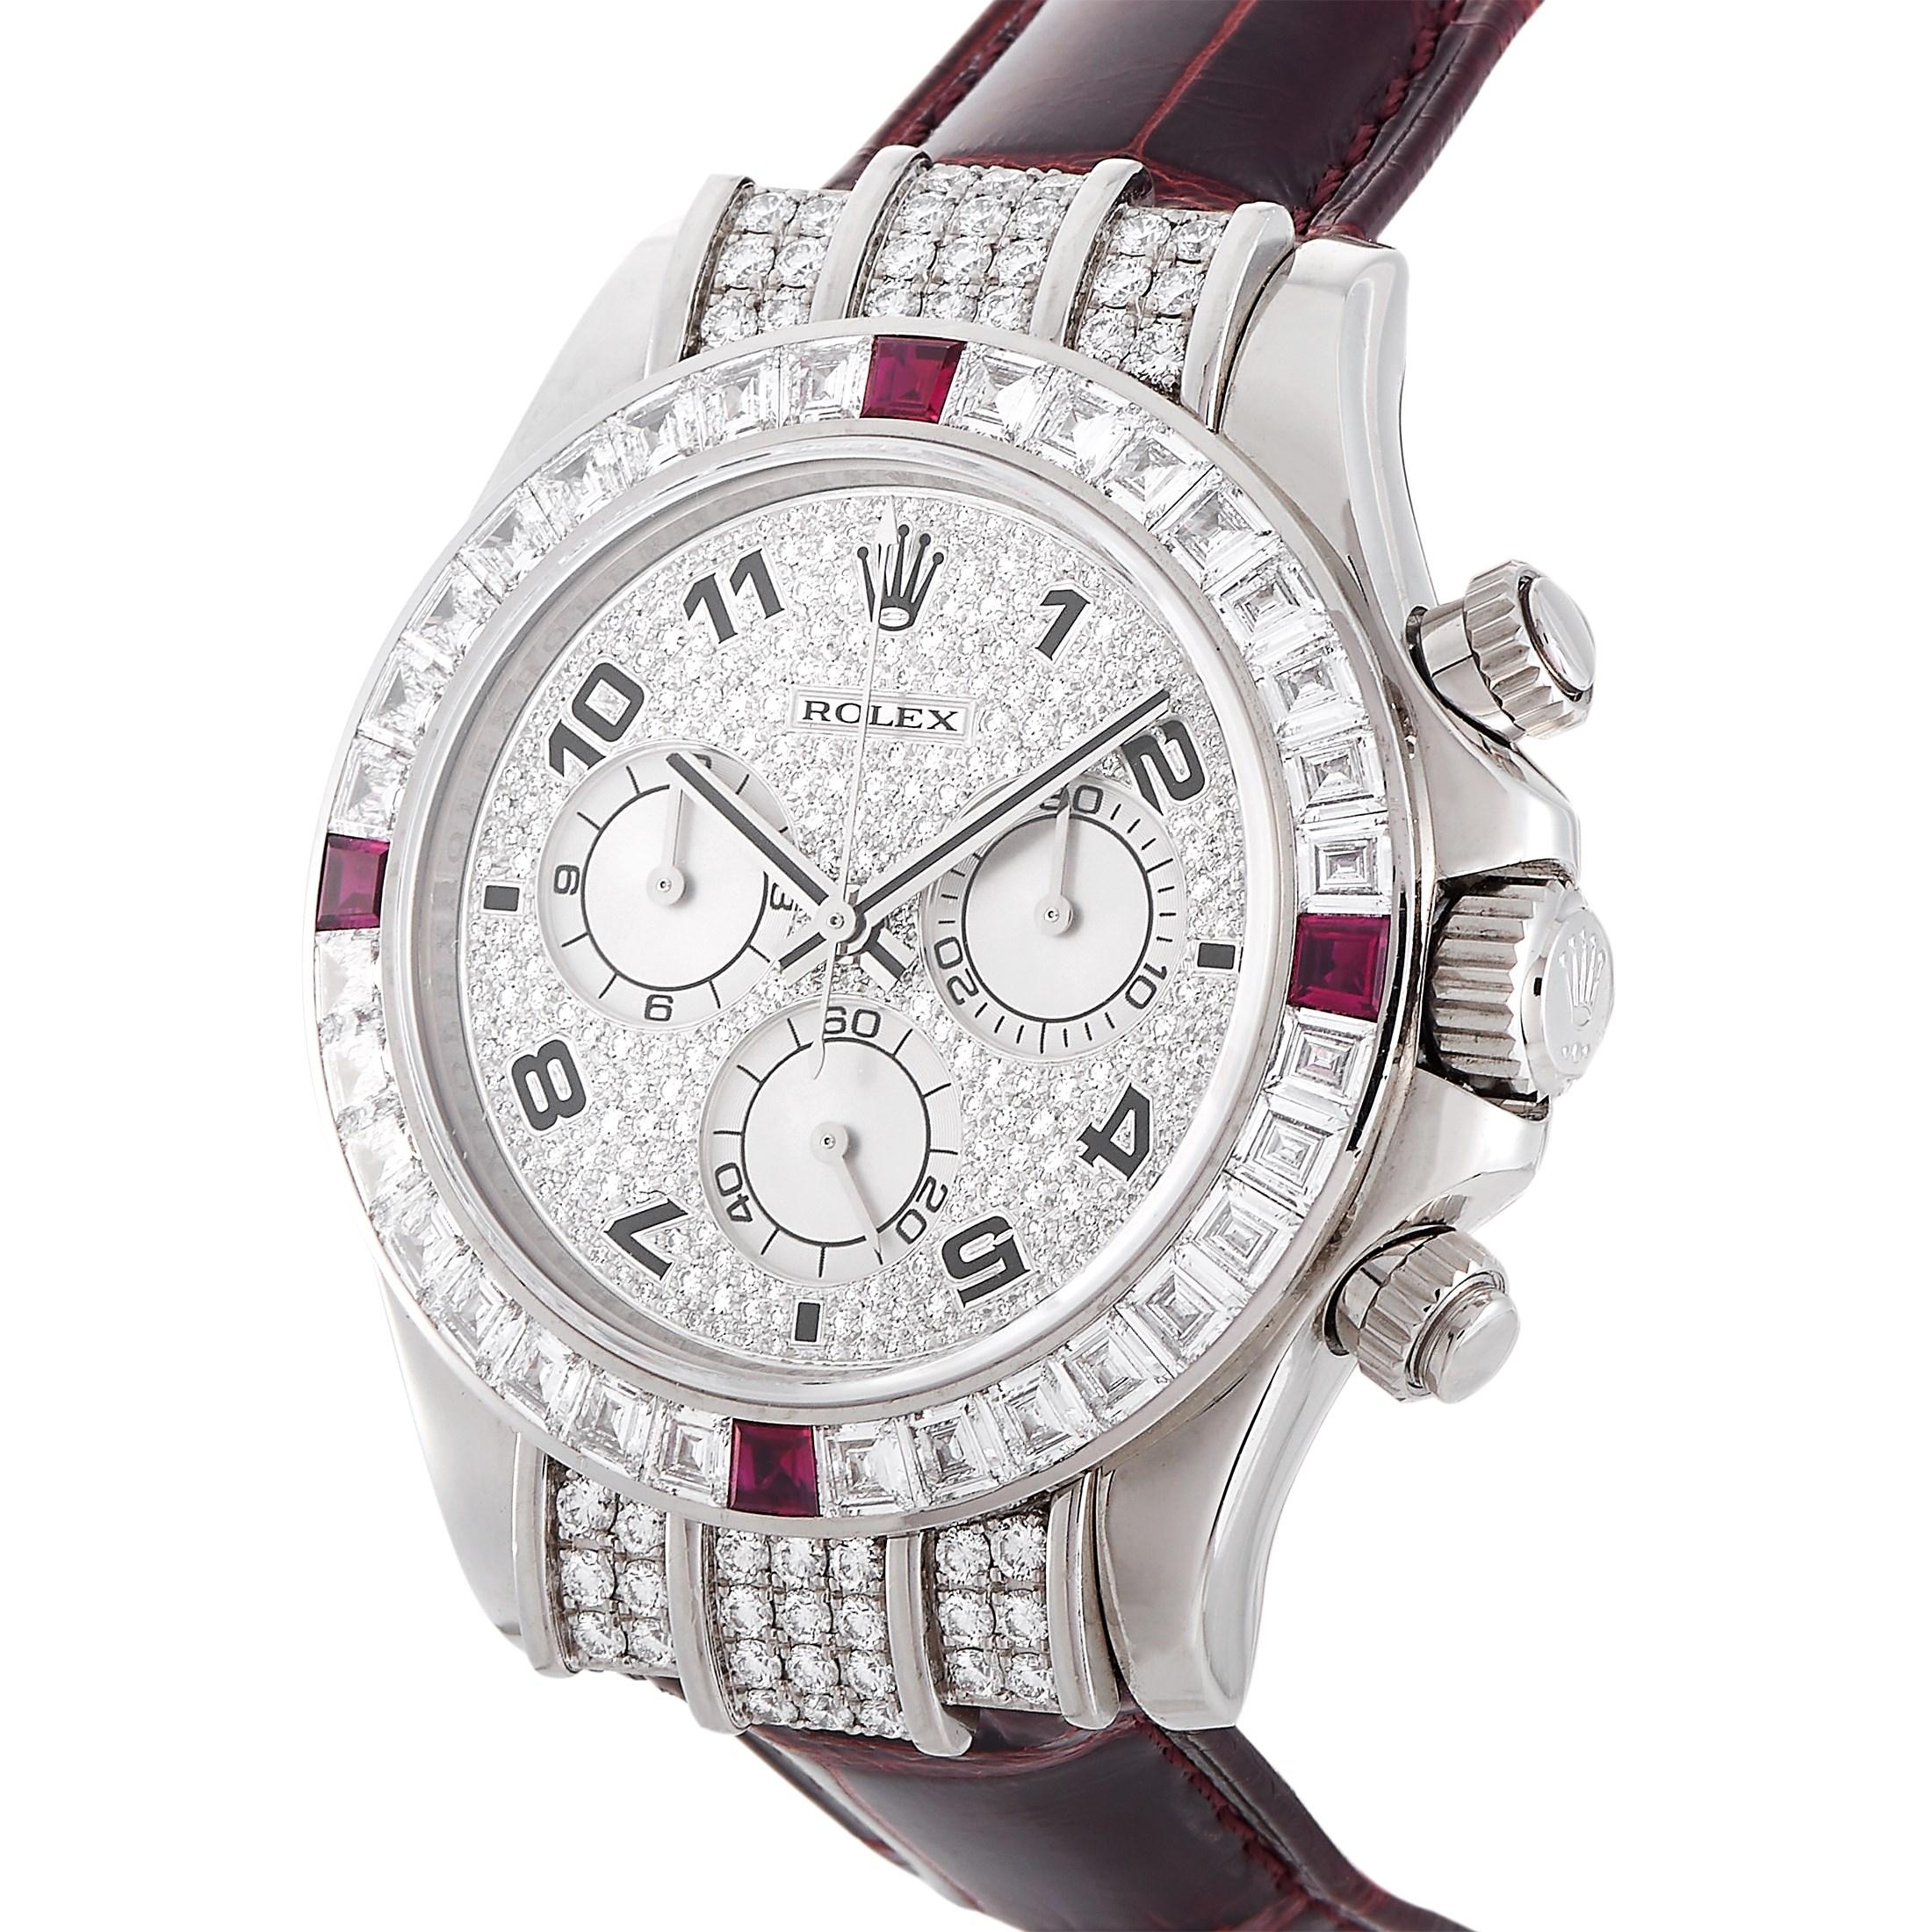 This is a fine and rare Rolex Cosmograph Daytona, reference number 116599.

The watch boasts a diamond-embellished 18K white gold case that measures 39 mm in diameter. The case is fitted with a bezel set with baguette-cut diamonds and four rubies.